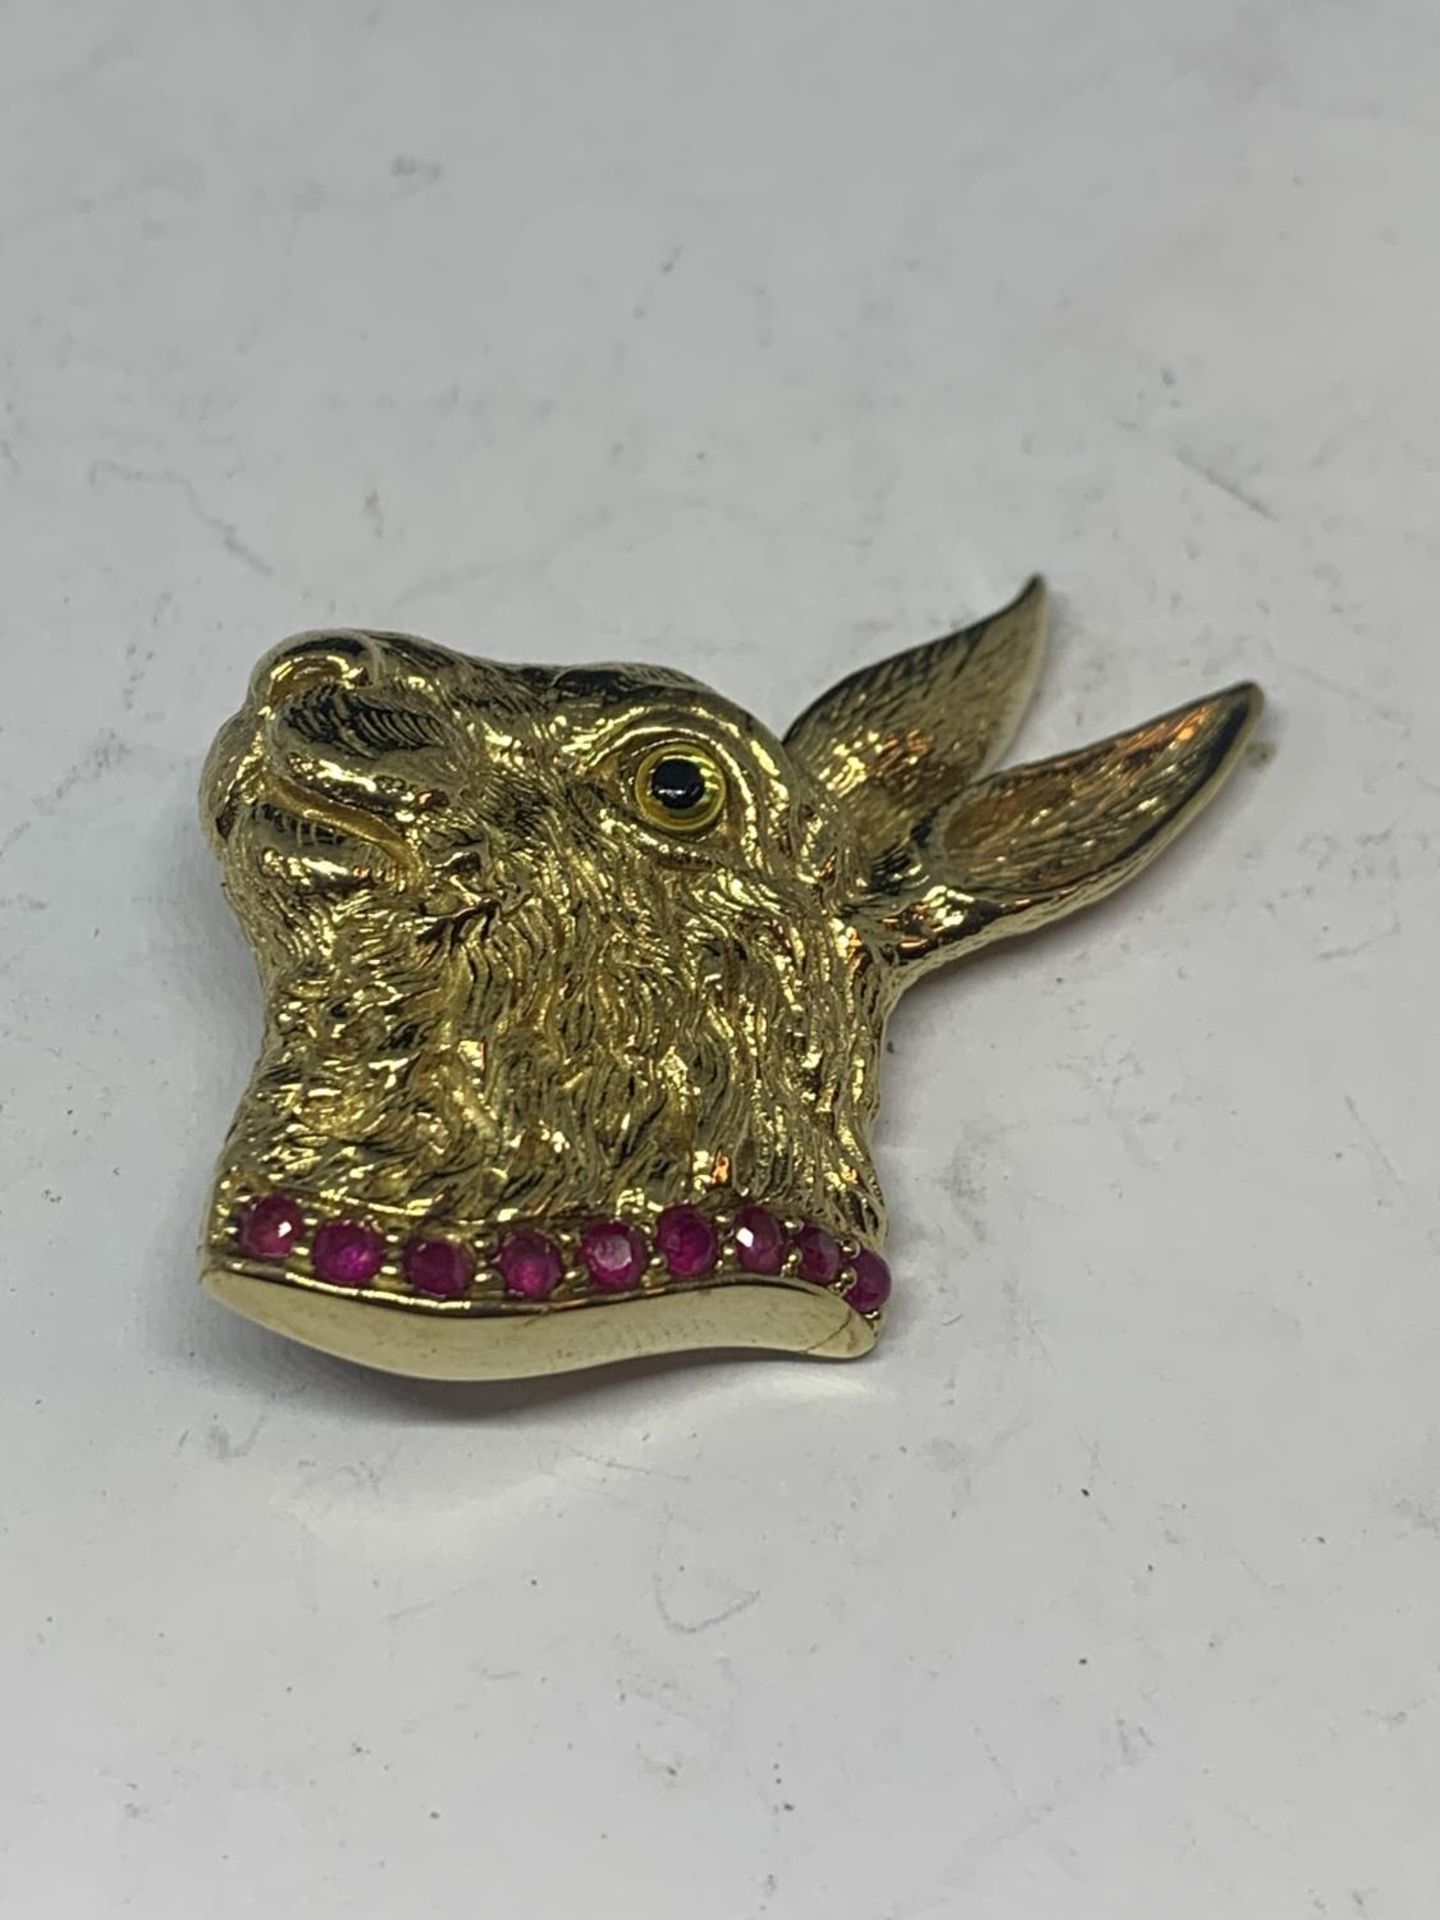 A SILVER GILT PENDANT IN THE FORM OF A HARE WITH A PINK STONE COLLAR - Image 2 of 4